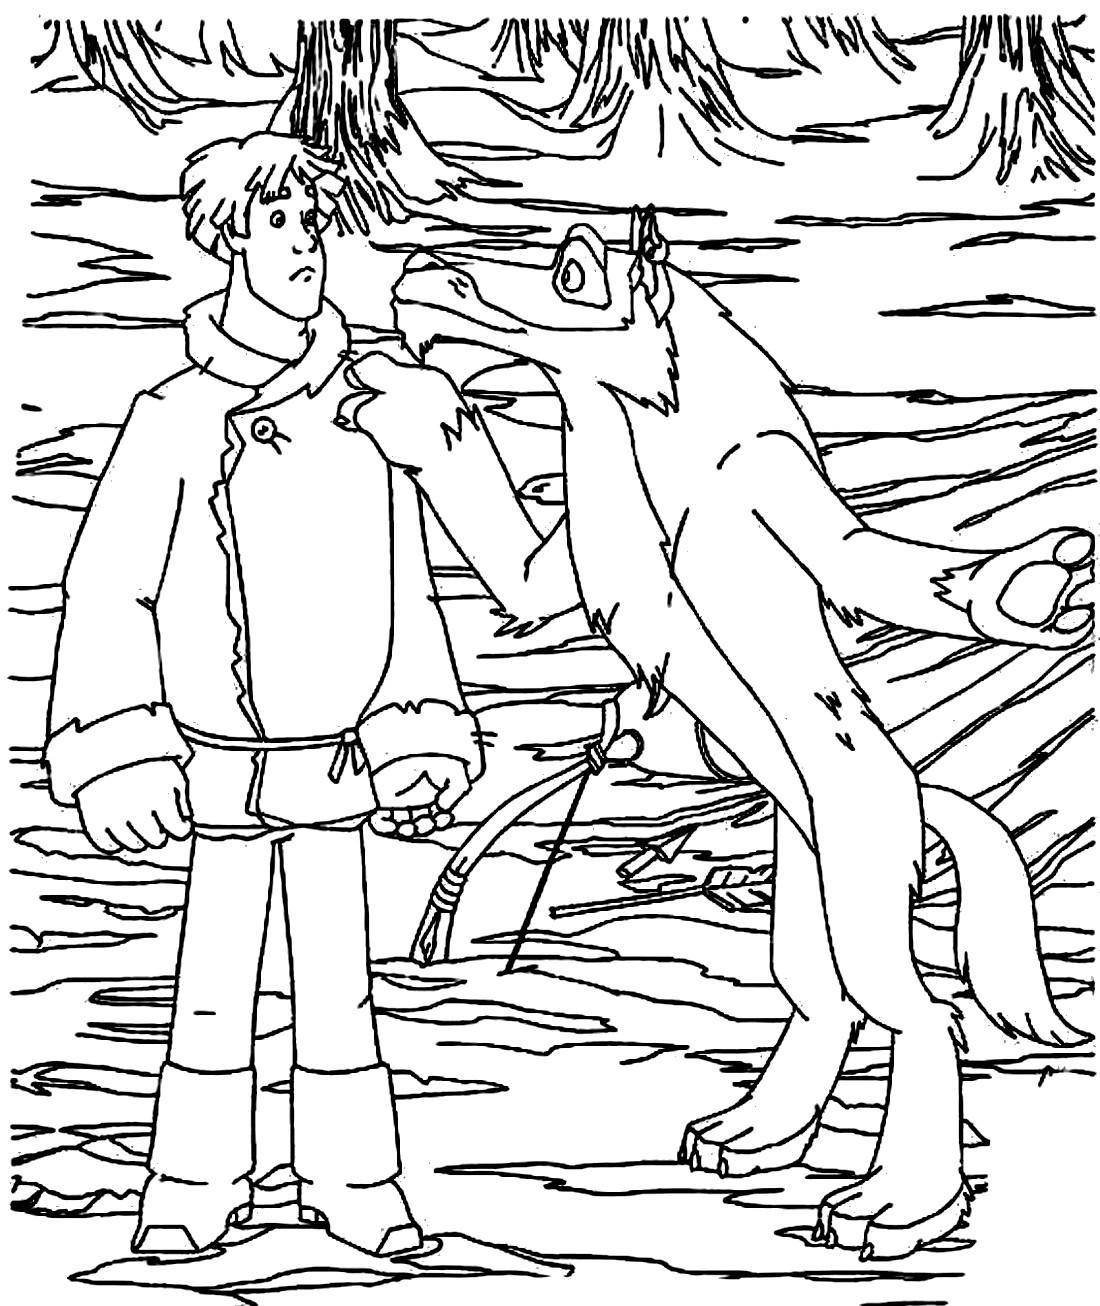 Bright Ivan Tsarevich and the gray wolf 4 coloring